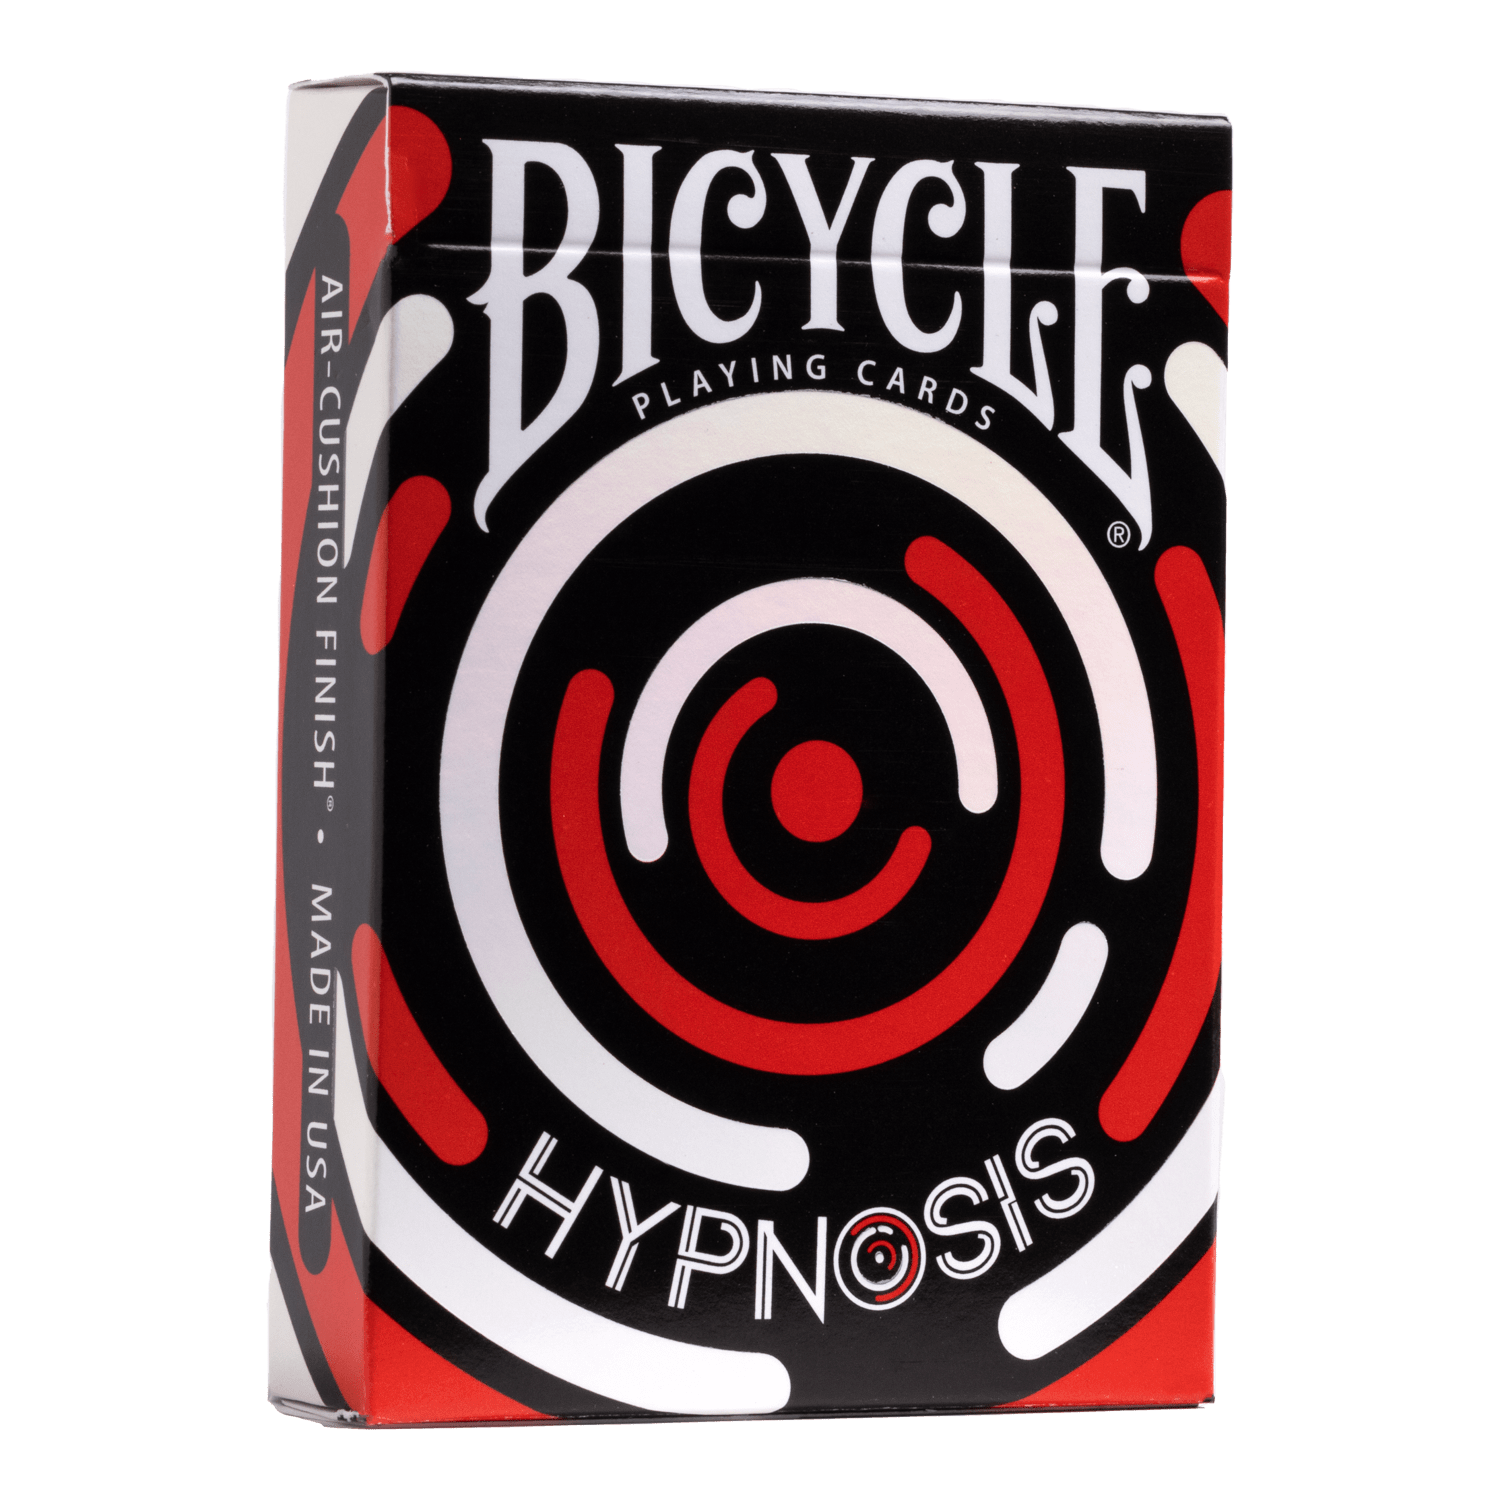 Hypnosis V3 - Bicycle Playing Cards